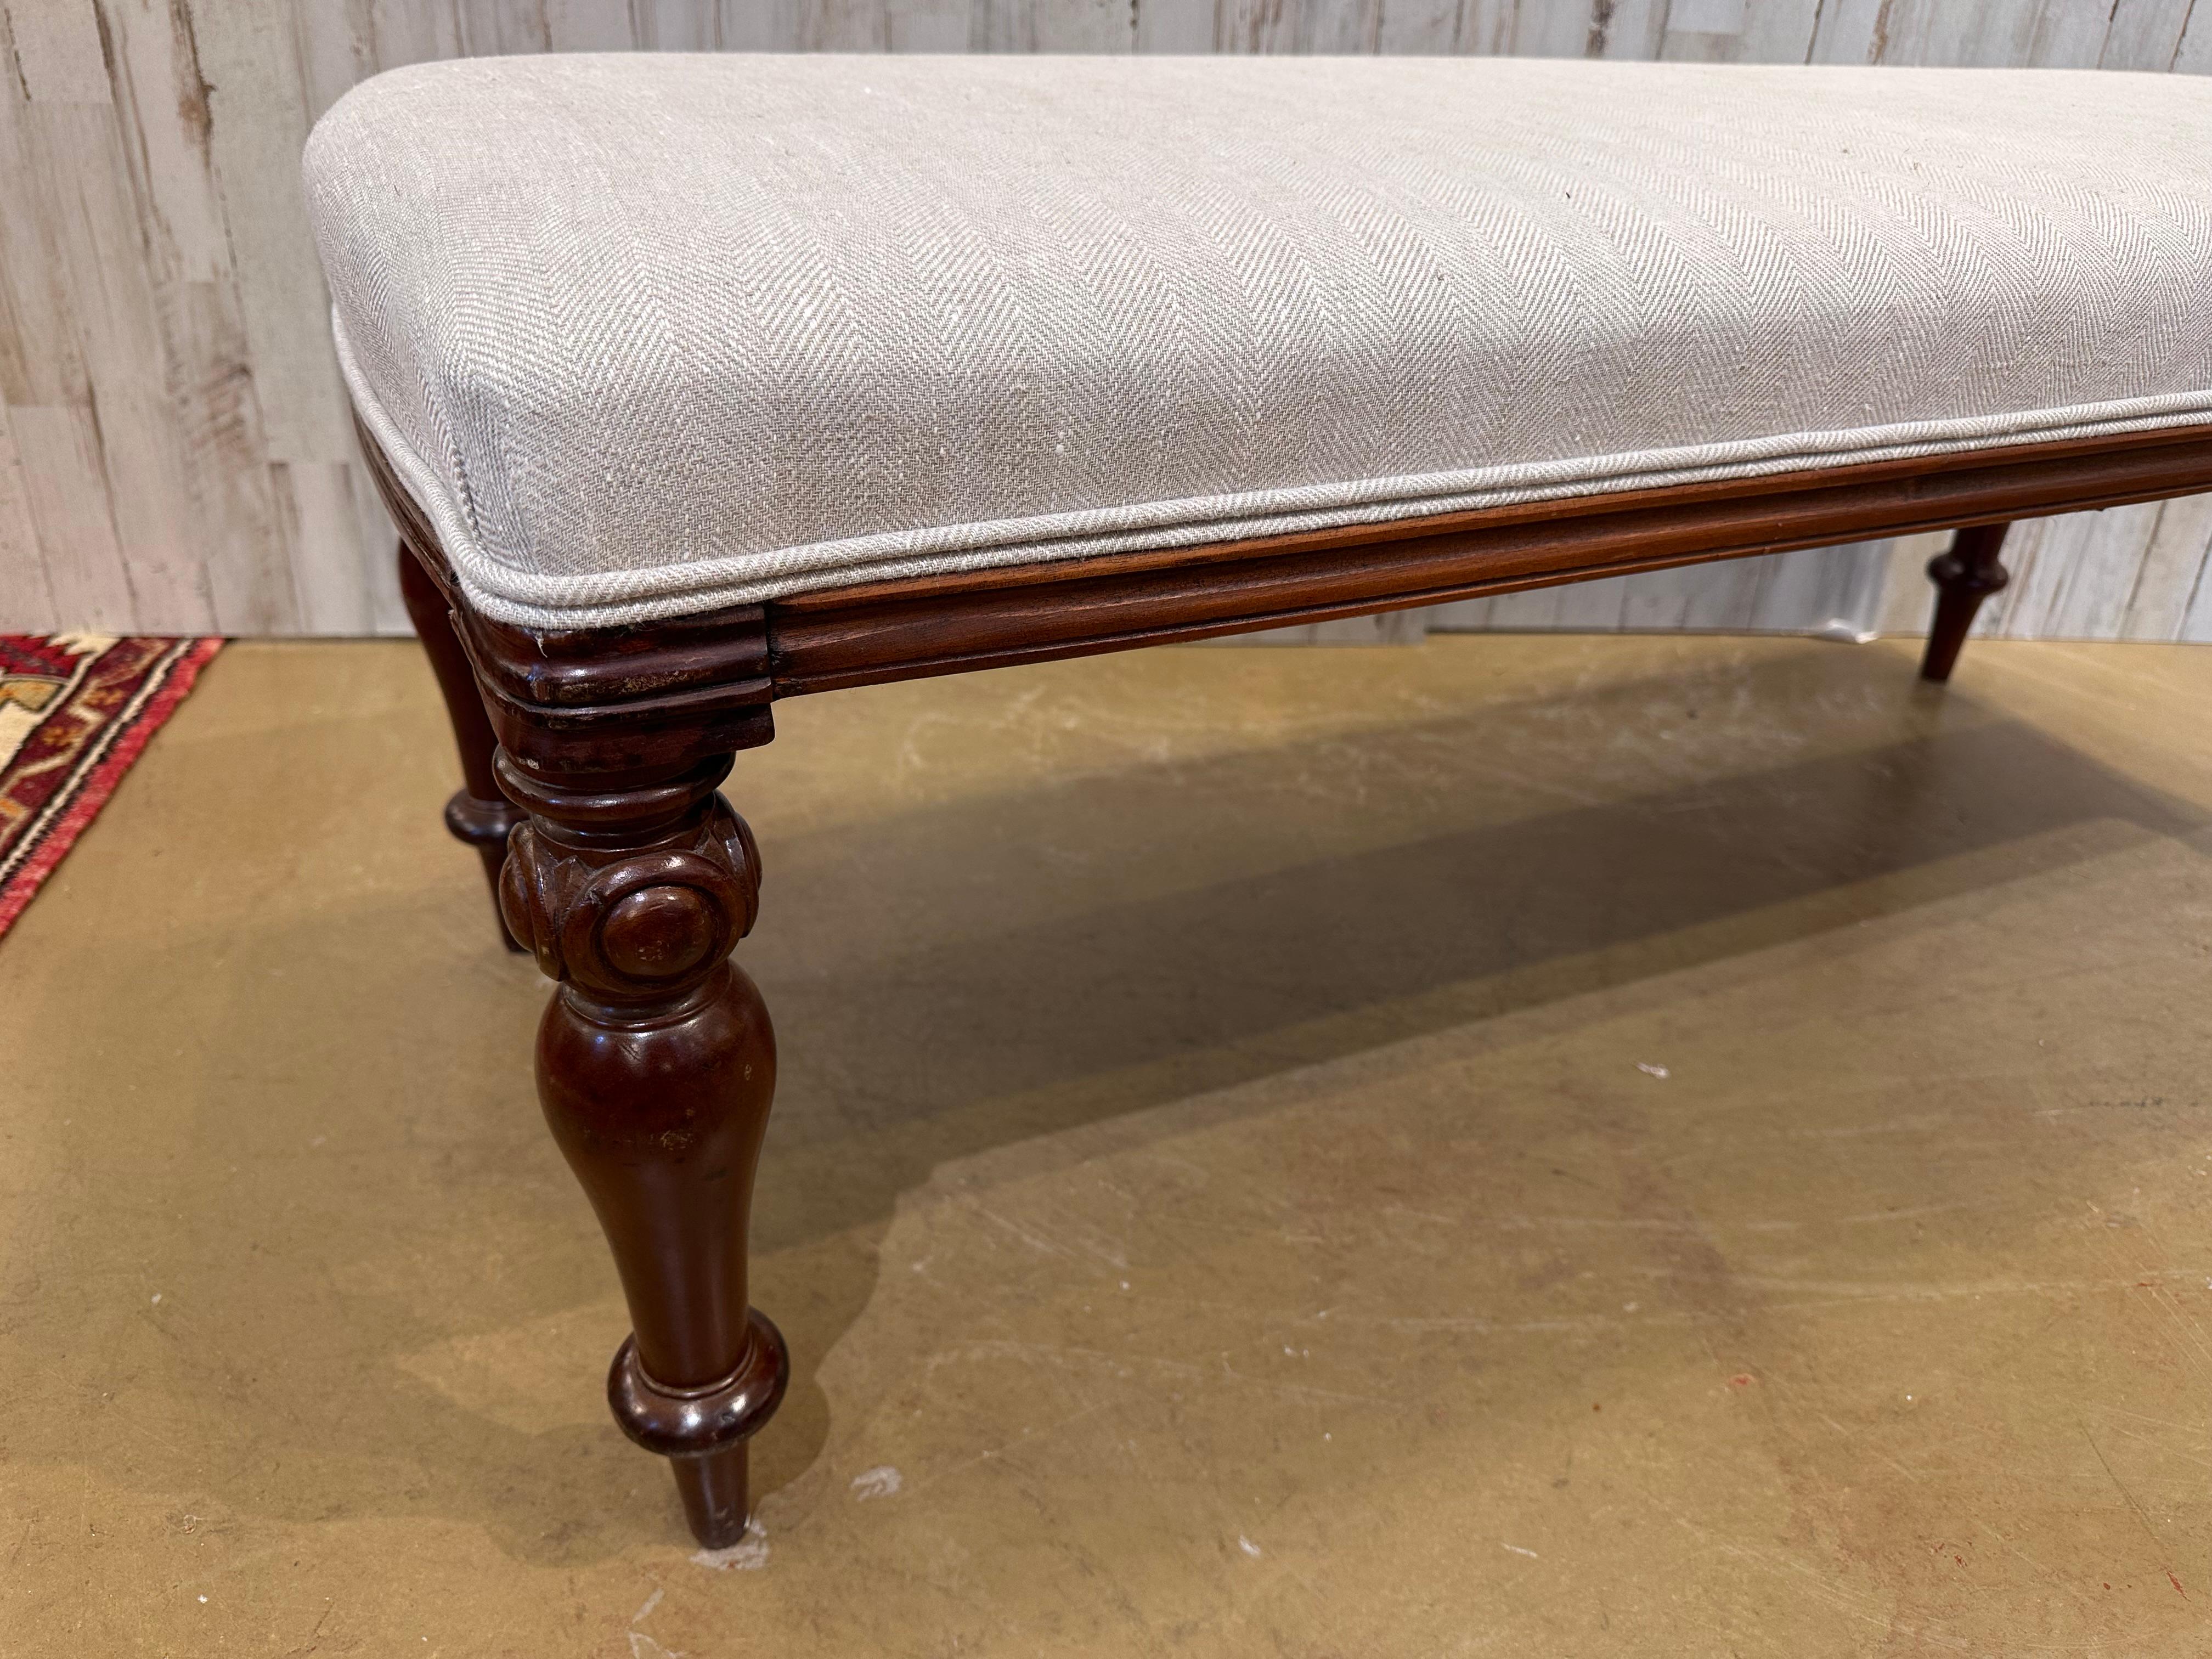 This is a beautiful antique English bench! Newly reupholstered, this bench is in stunning condition. The legs are sturdy and firm, with a lovely patina and hand carved detailing as well as turned design. The new fabric is a neutral cream that would